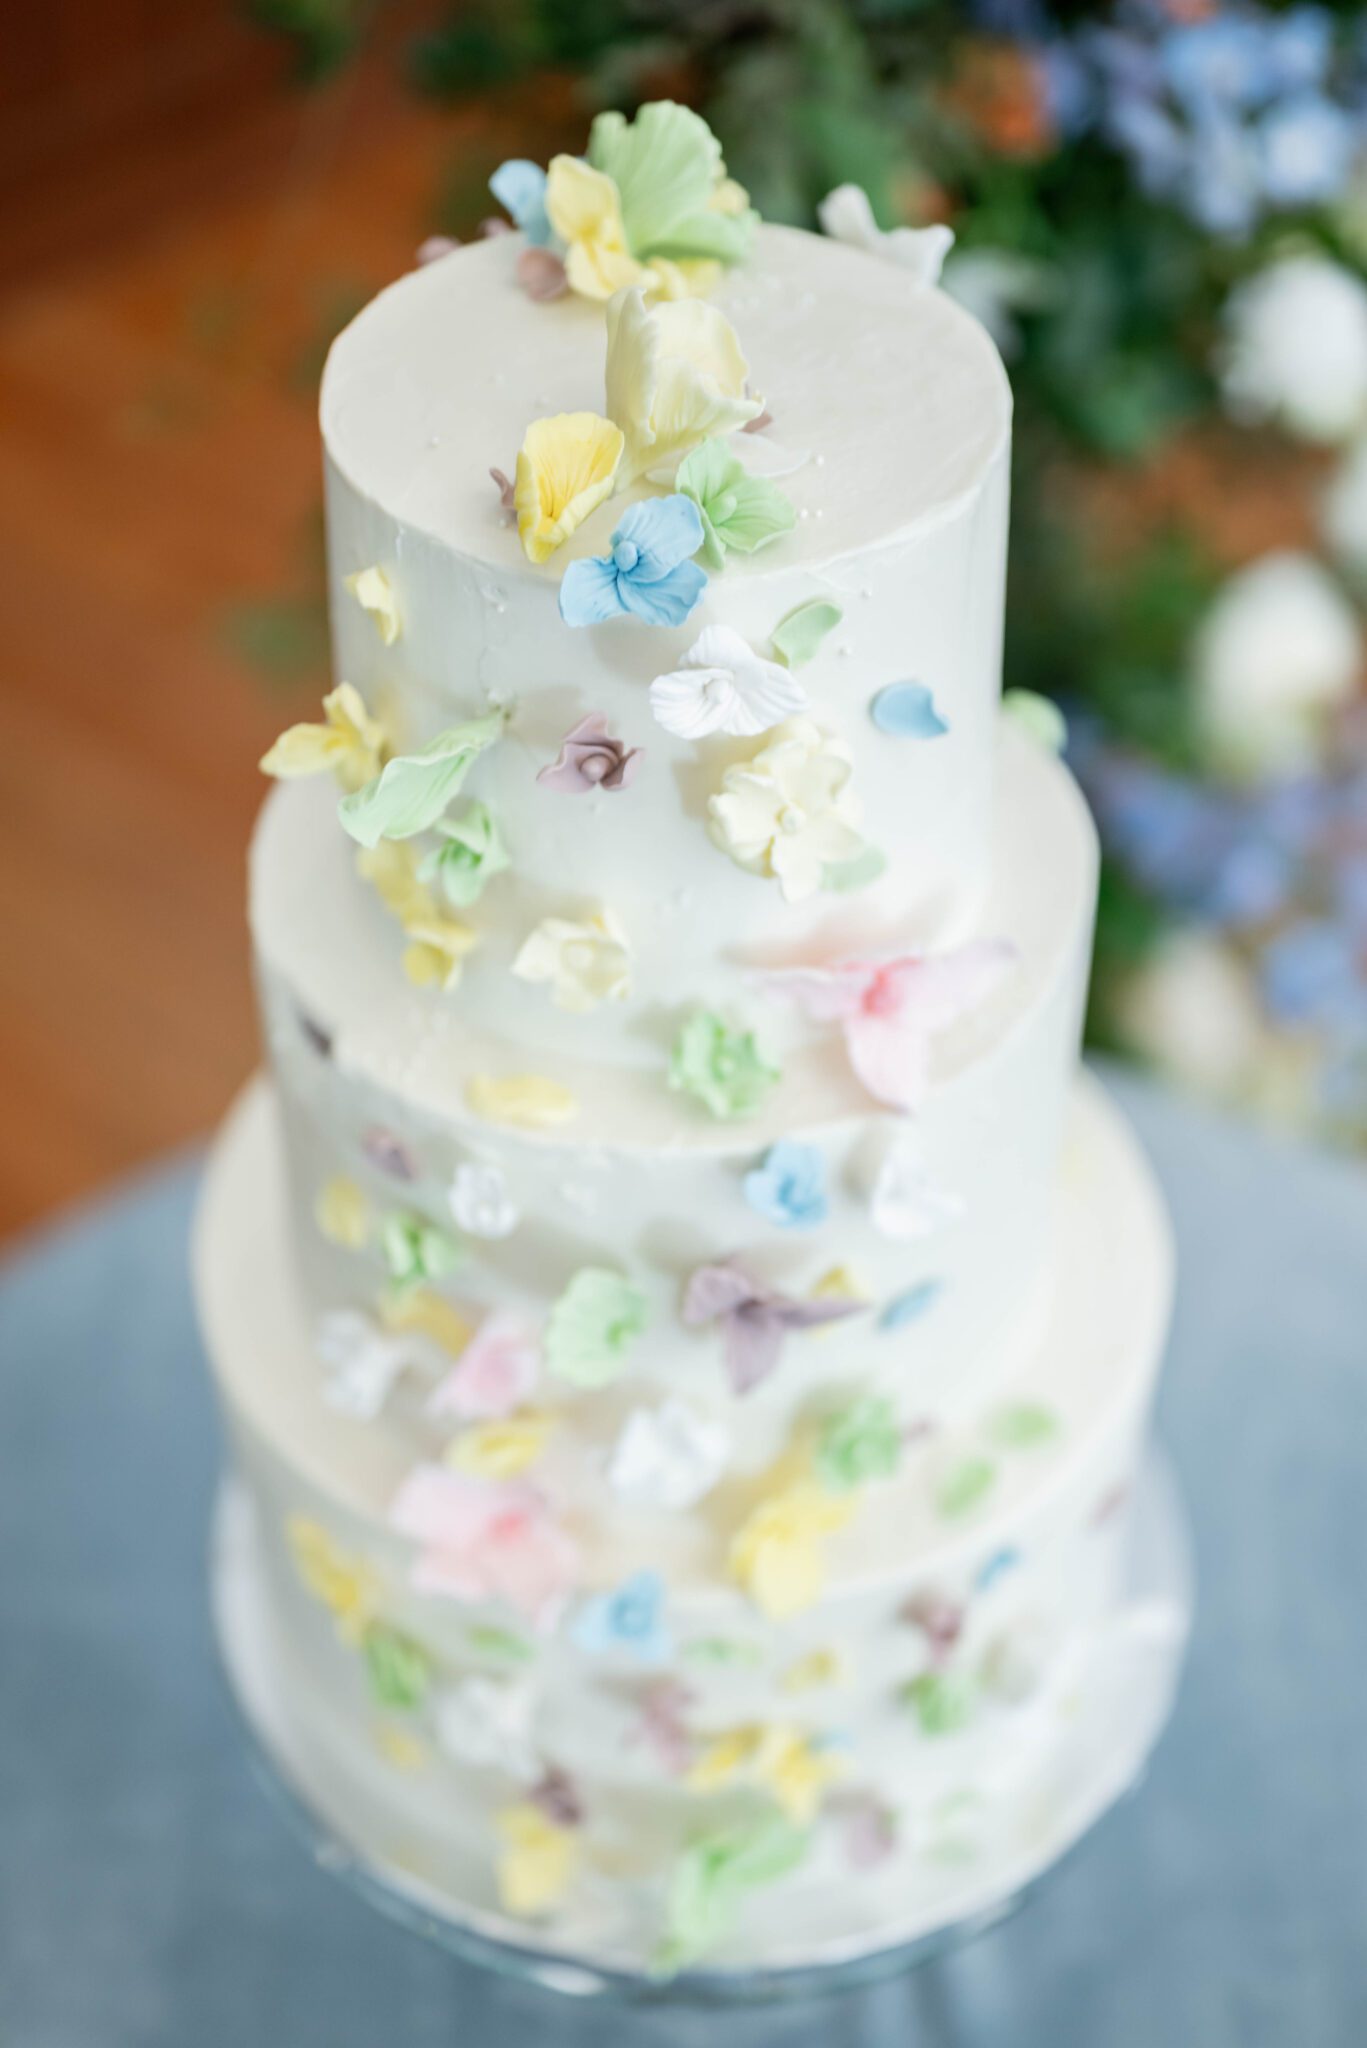 whimsical and romantic pastel wedding cake inspiration, sugar flower elements decorating a white tiered cake in soft hues and delicate tones, four-tiered wedding cake by Mish-T Cakes for spring wedding 